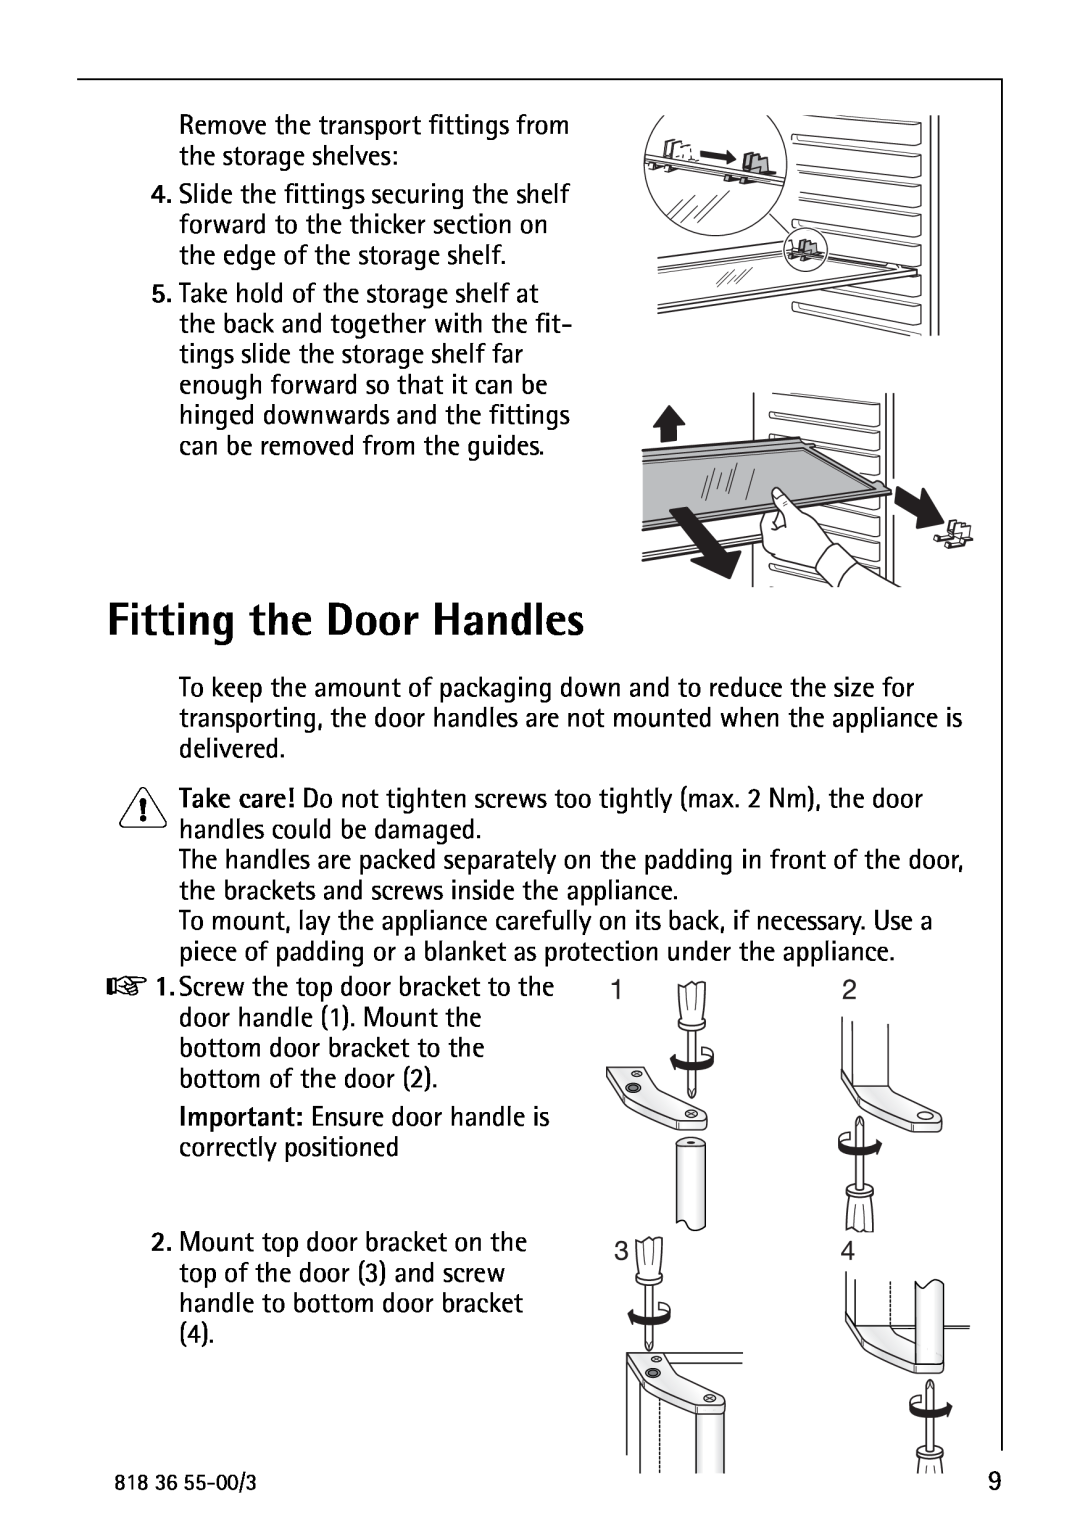 AEG 86378-KG operating instructions Fitting the Door Handles 